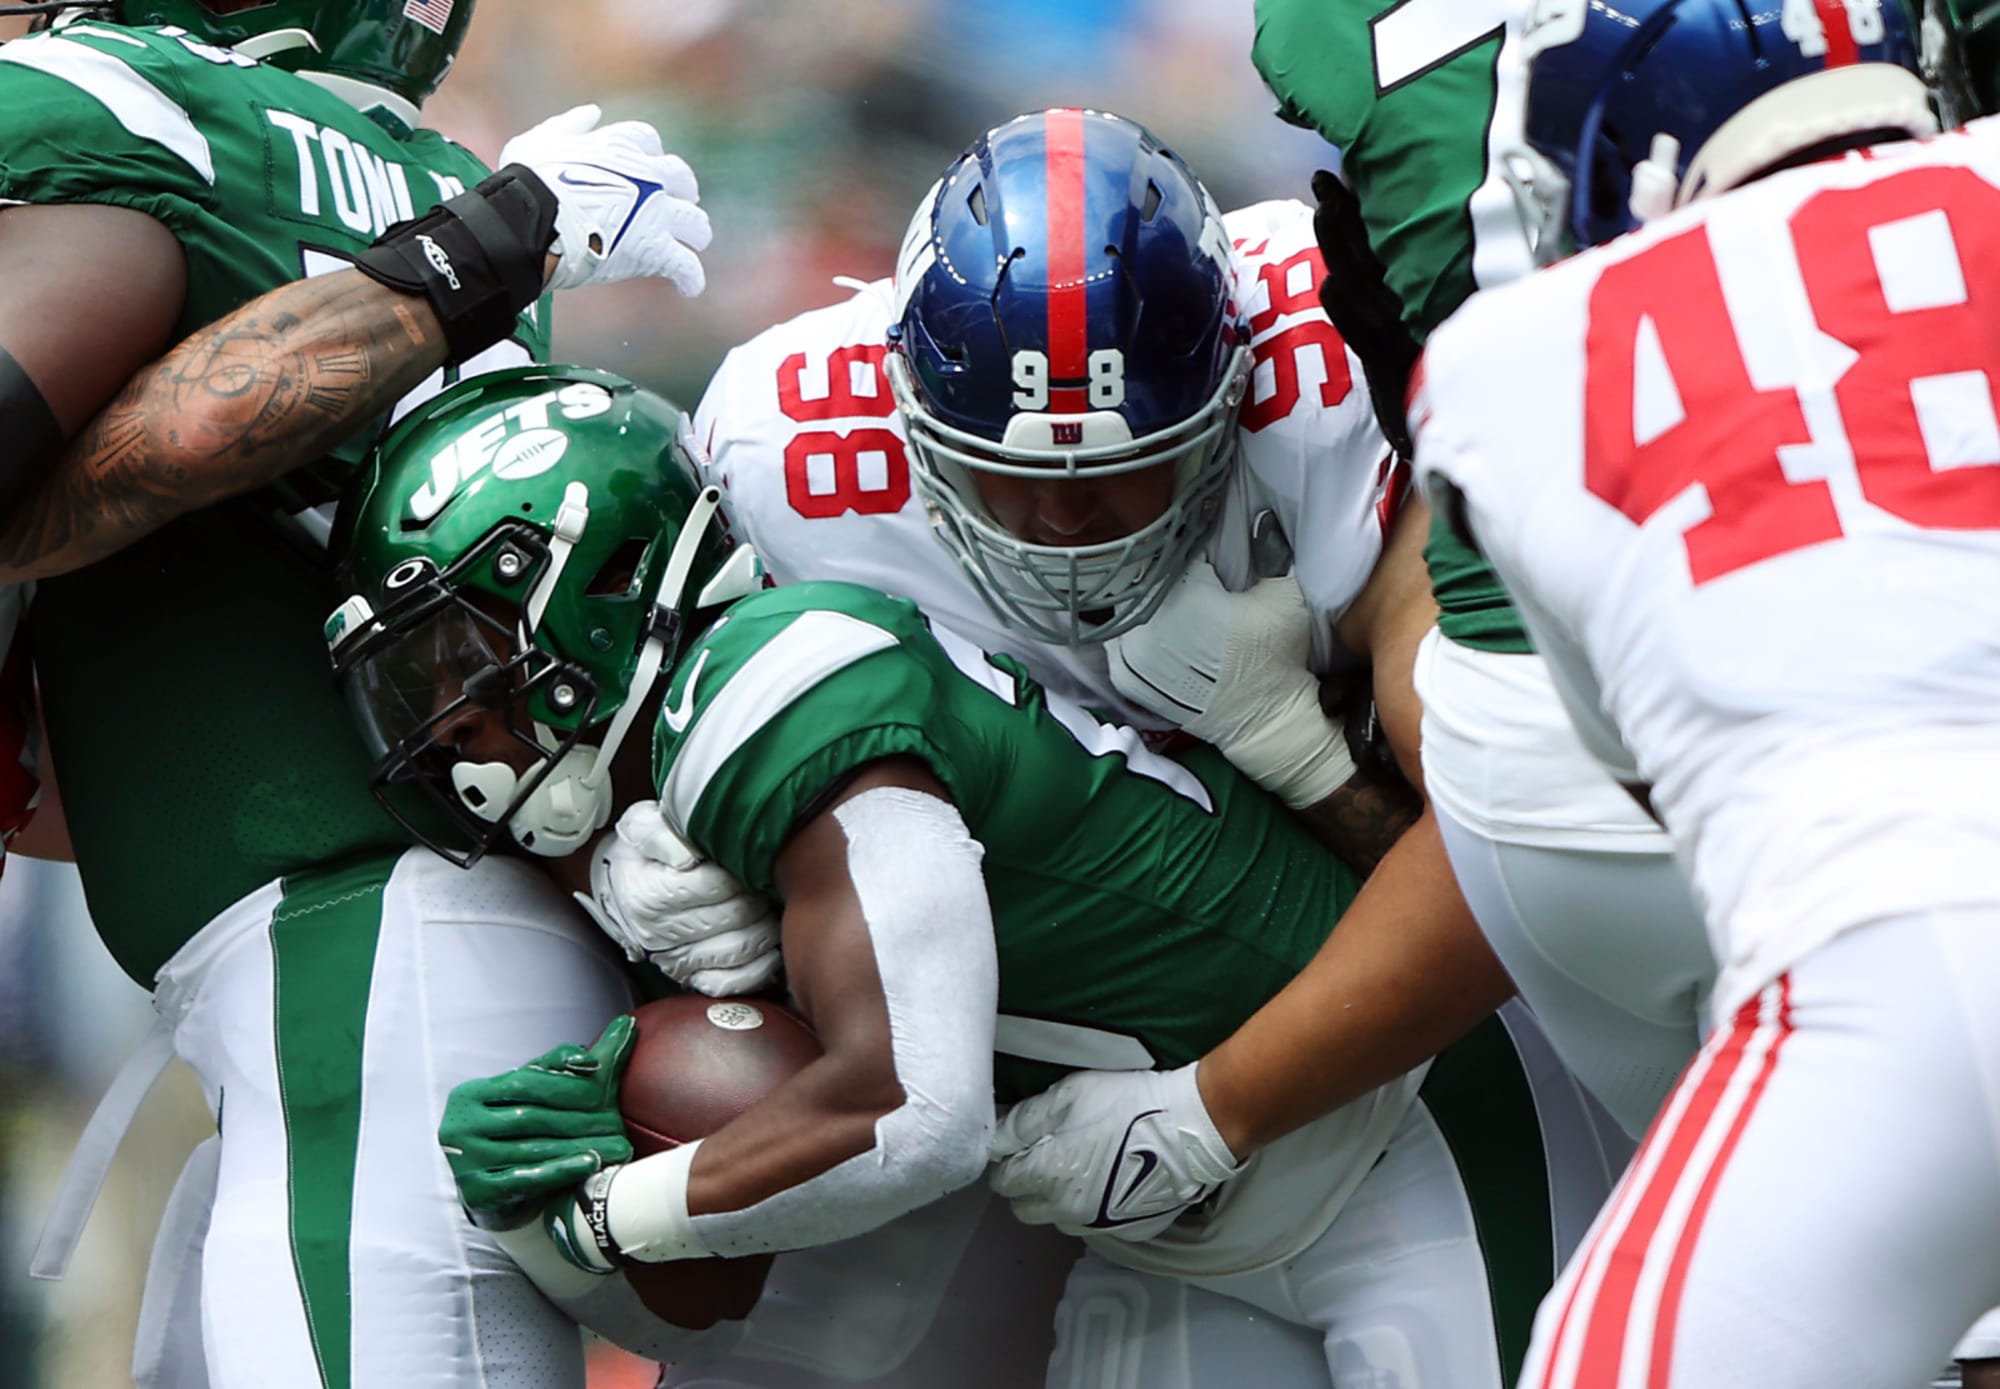 The Jets and Giants are bringing football back to New York